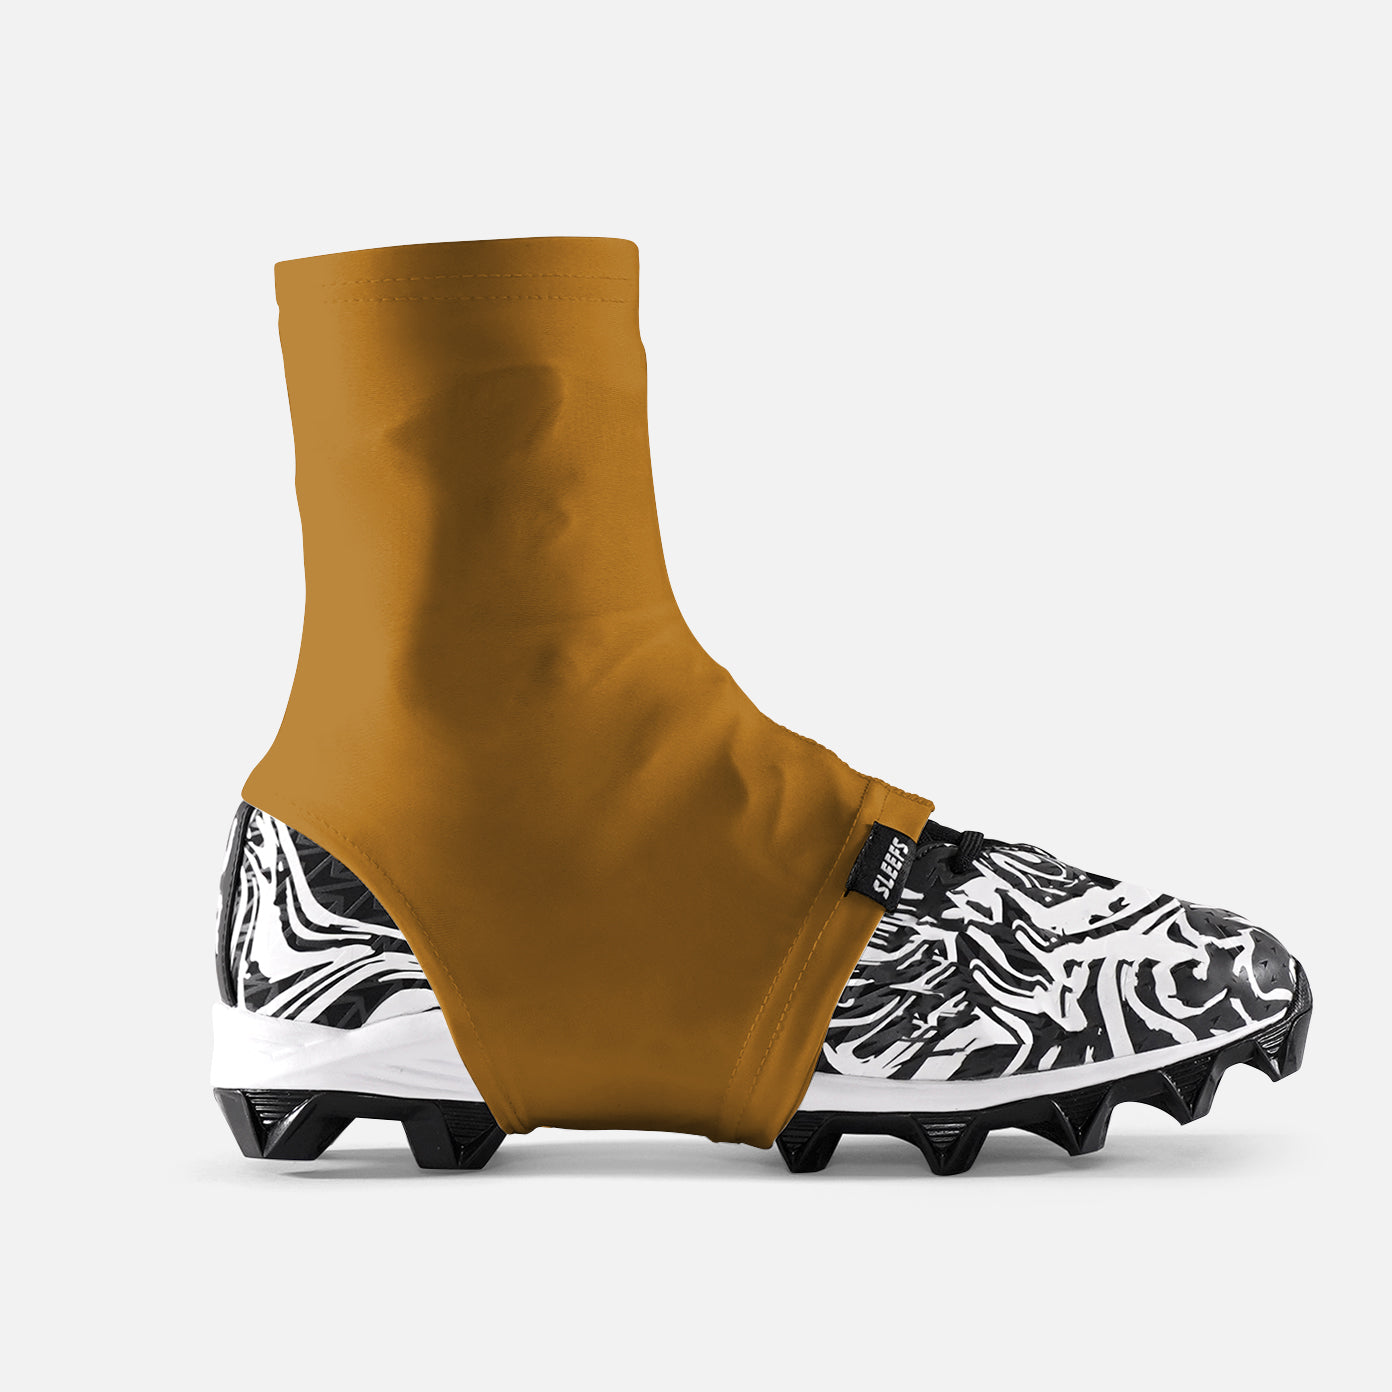 Hue Gold Kids Spats / Cleat Covers